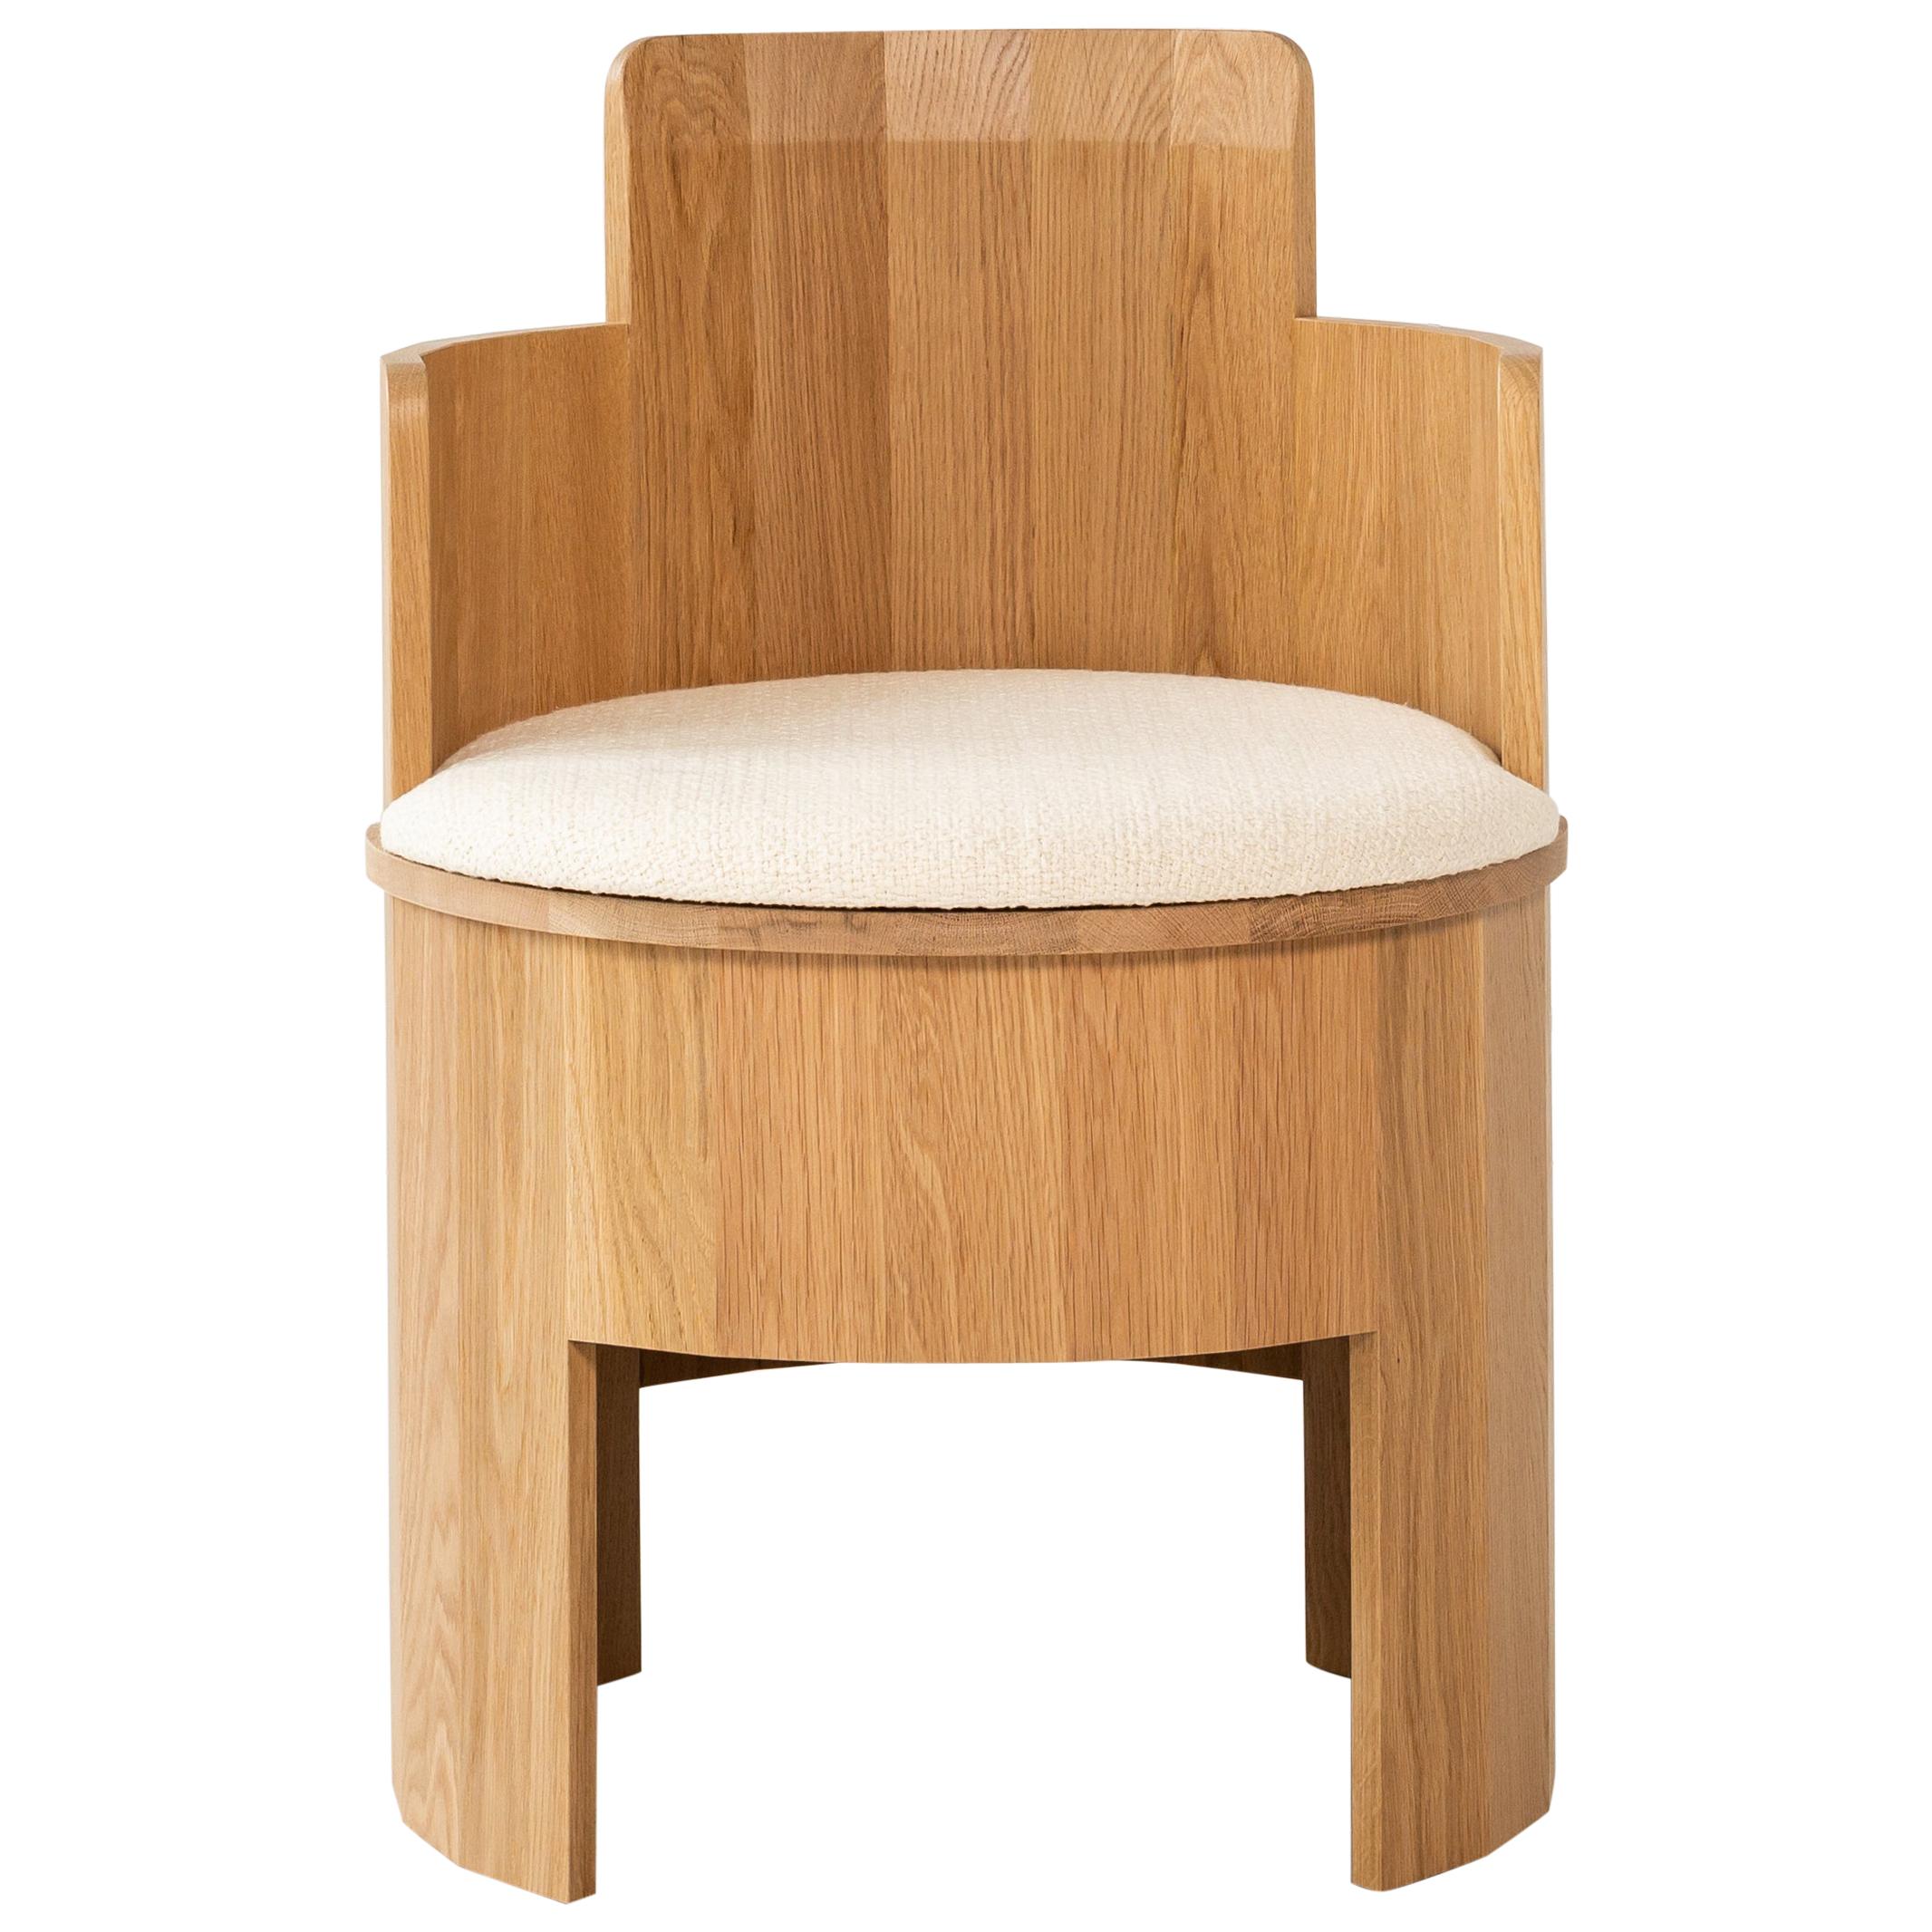 Contemporary Upholstered Cooperage Chair in White Oak by Fort Standard